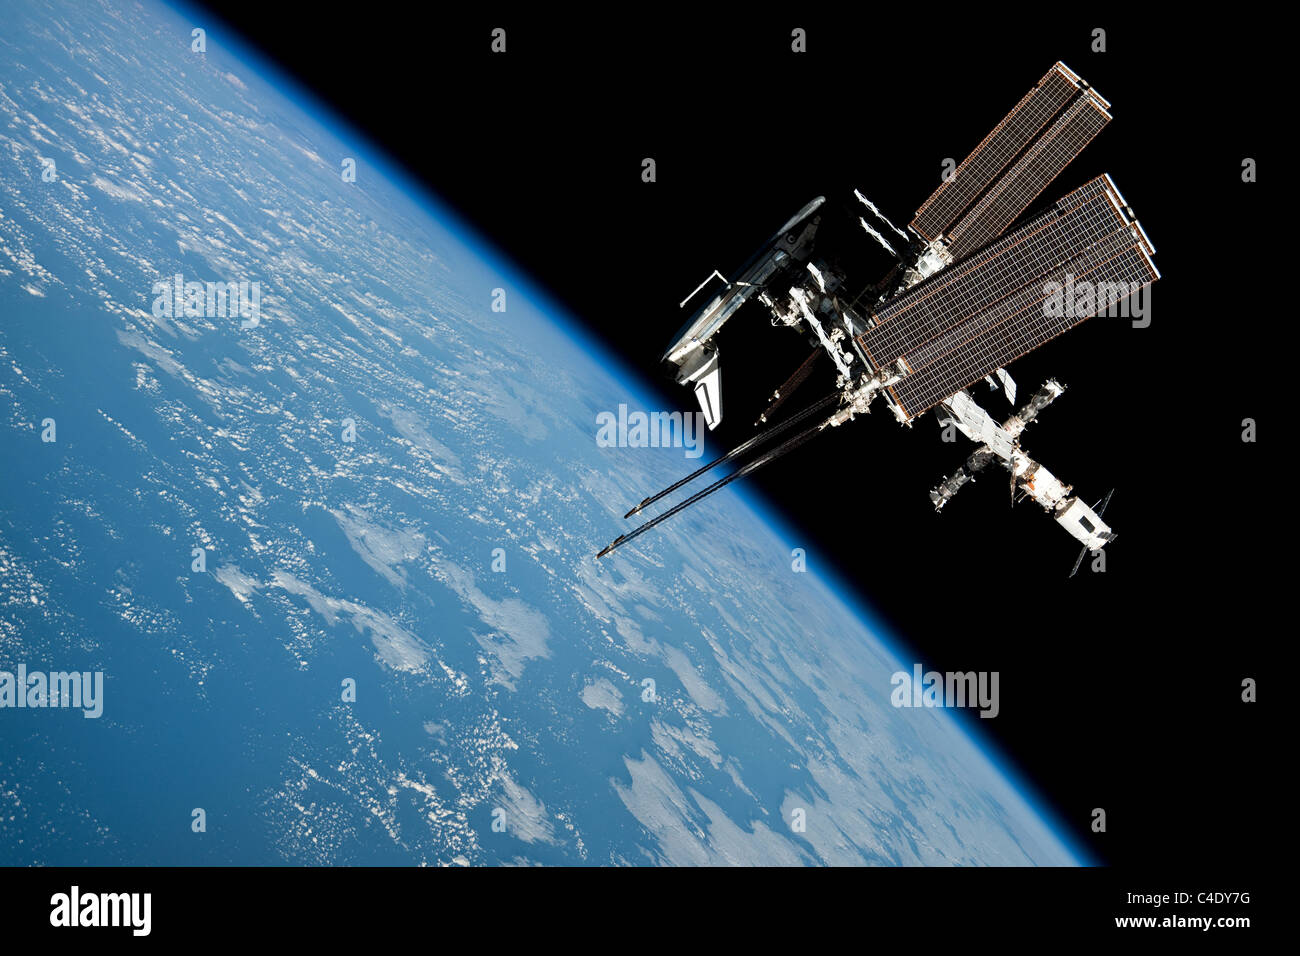 Space Shuttle Endeavour docked to the International Space Station Stock Photo